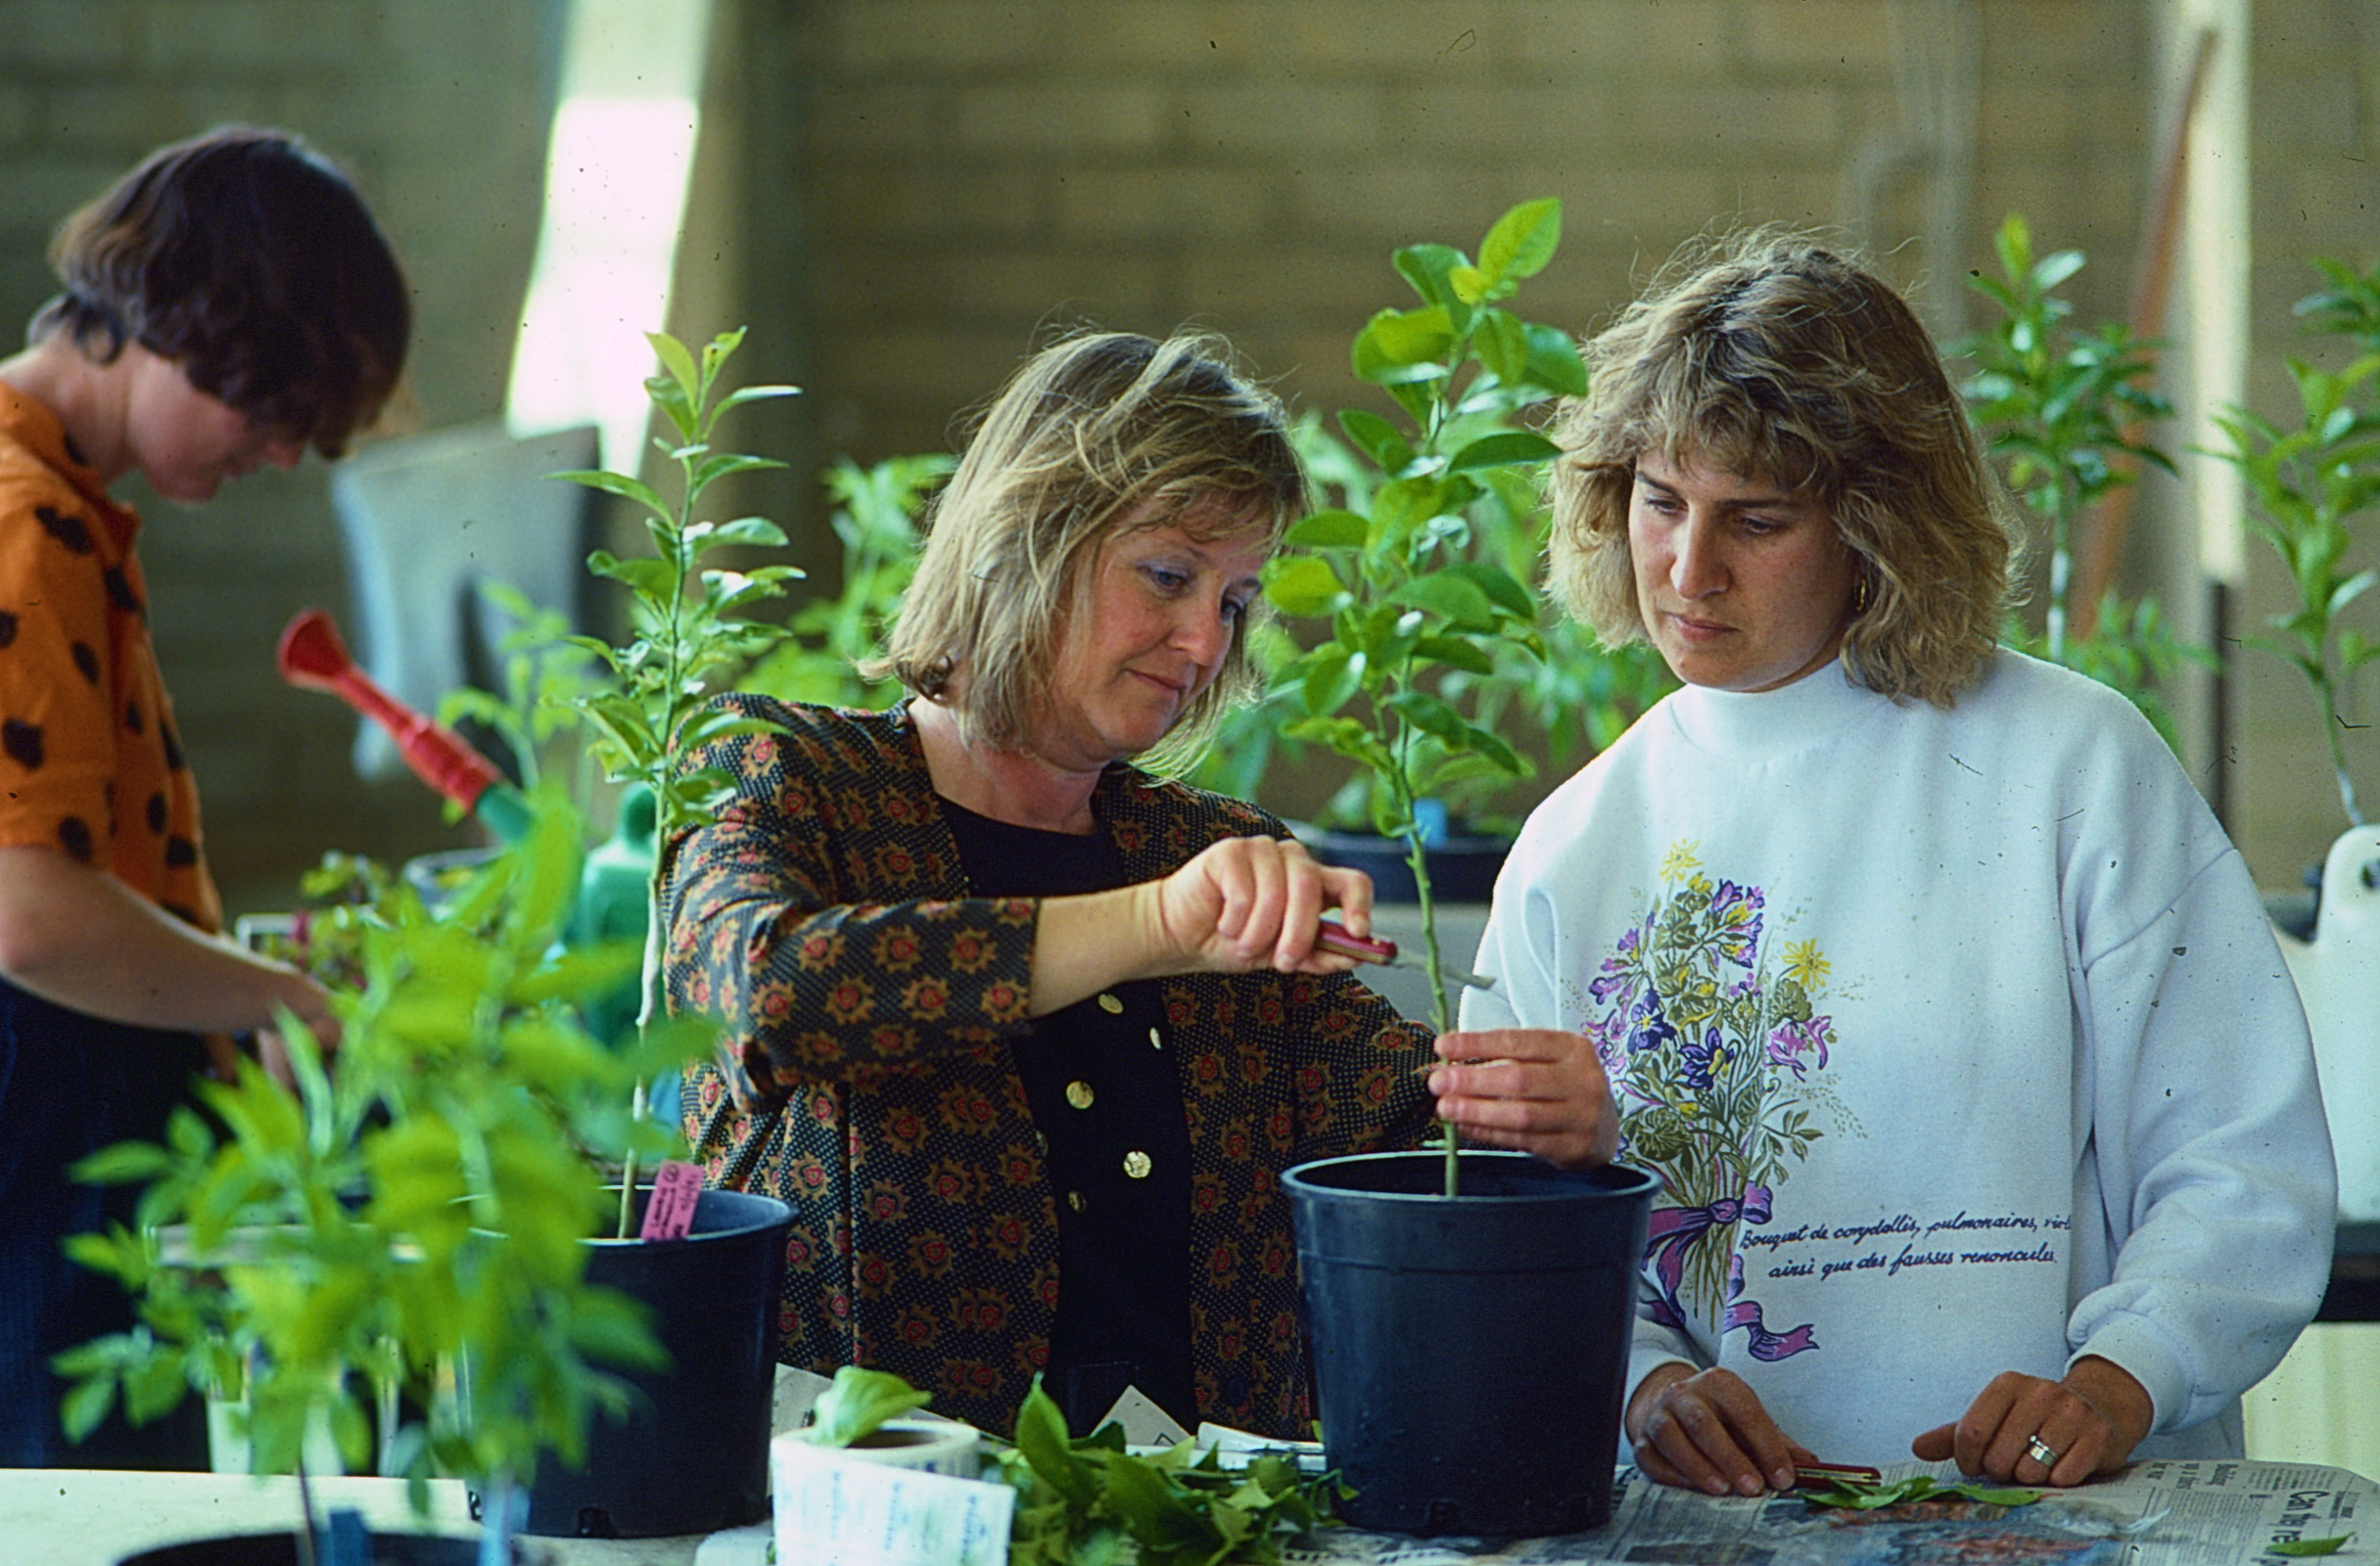 Two people studying a small plant, the staff member is cutting the stem